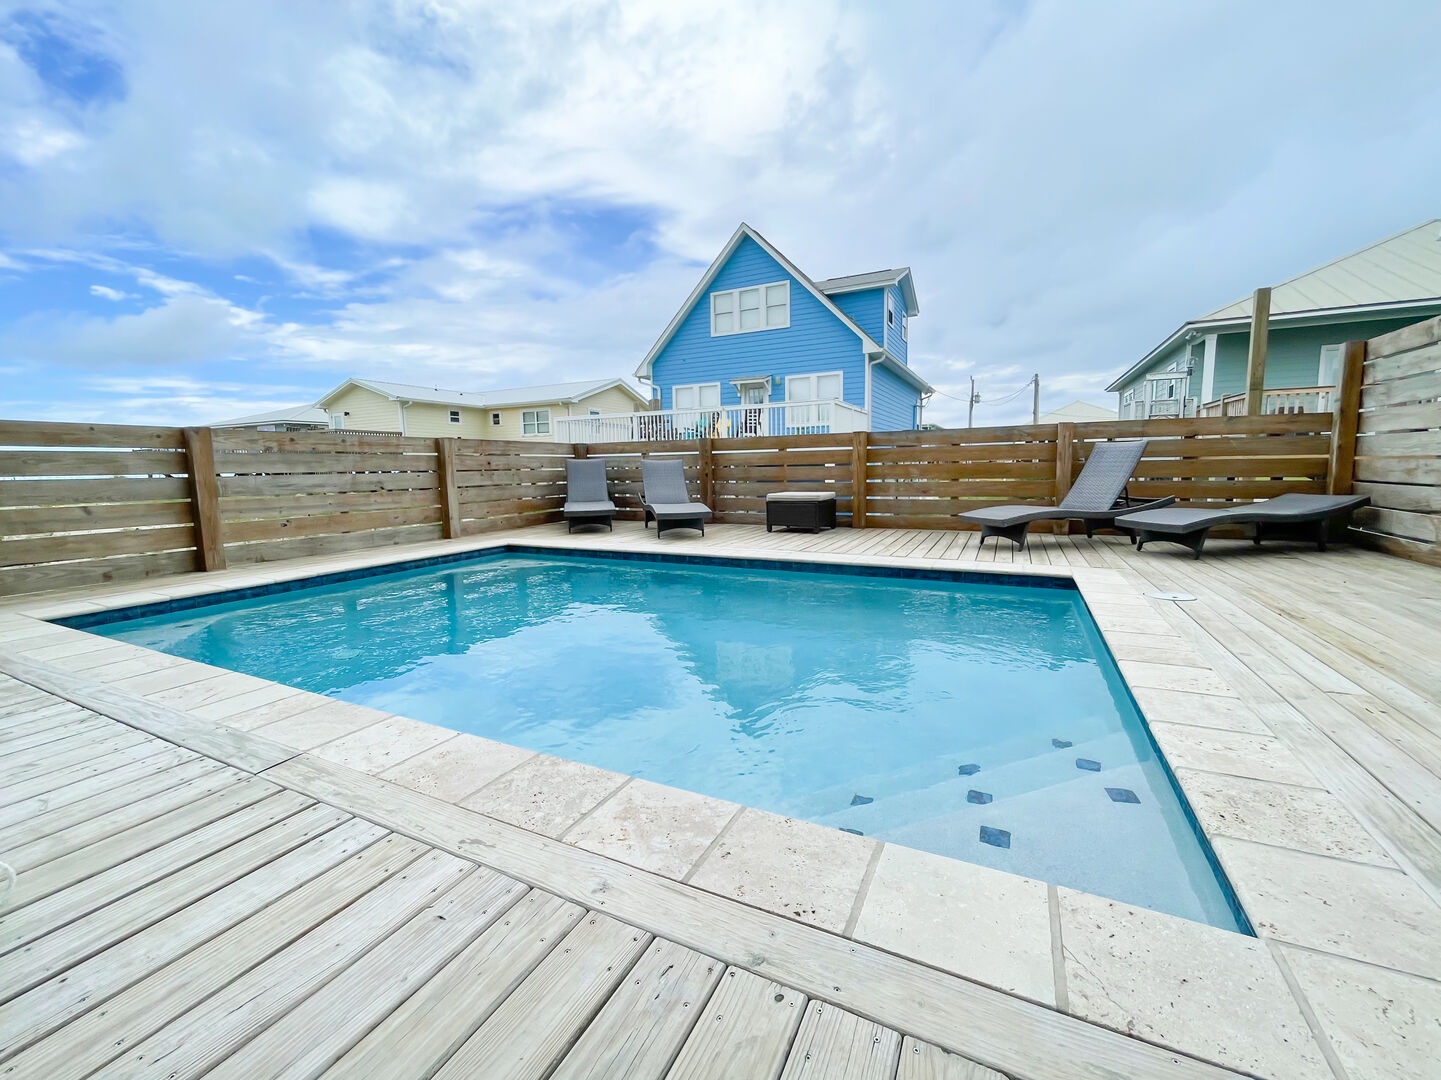 This pool may be heated during winter months for an additional fee